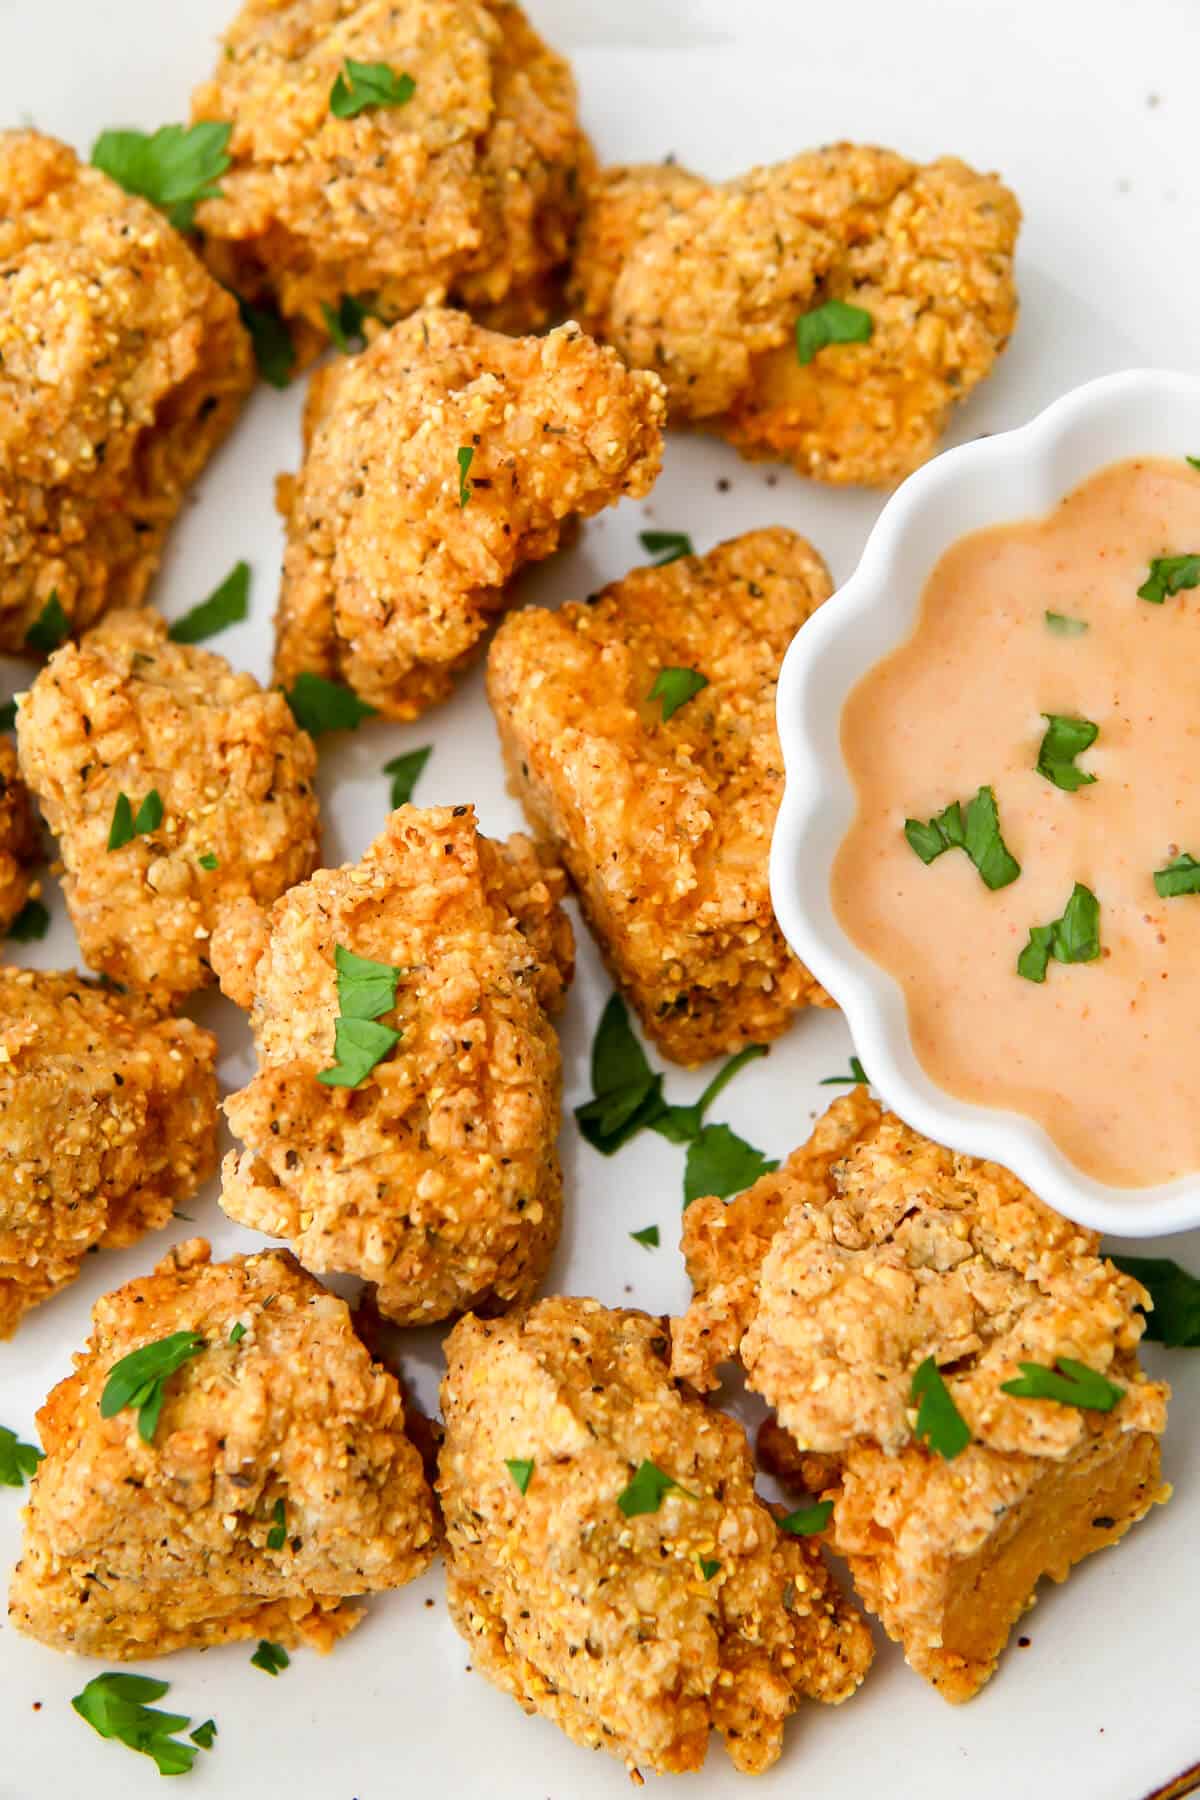 A close up of vegan chicken nuggets made from tofu with a dipping sauce on the side.